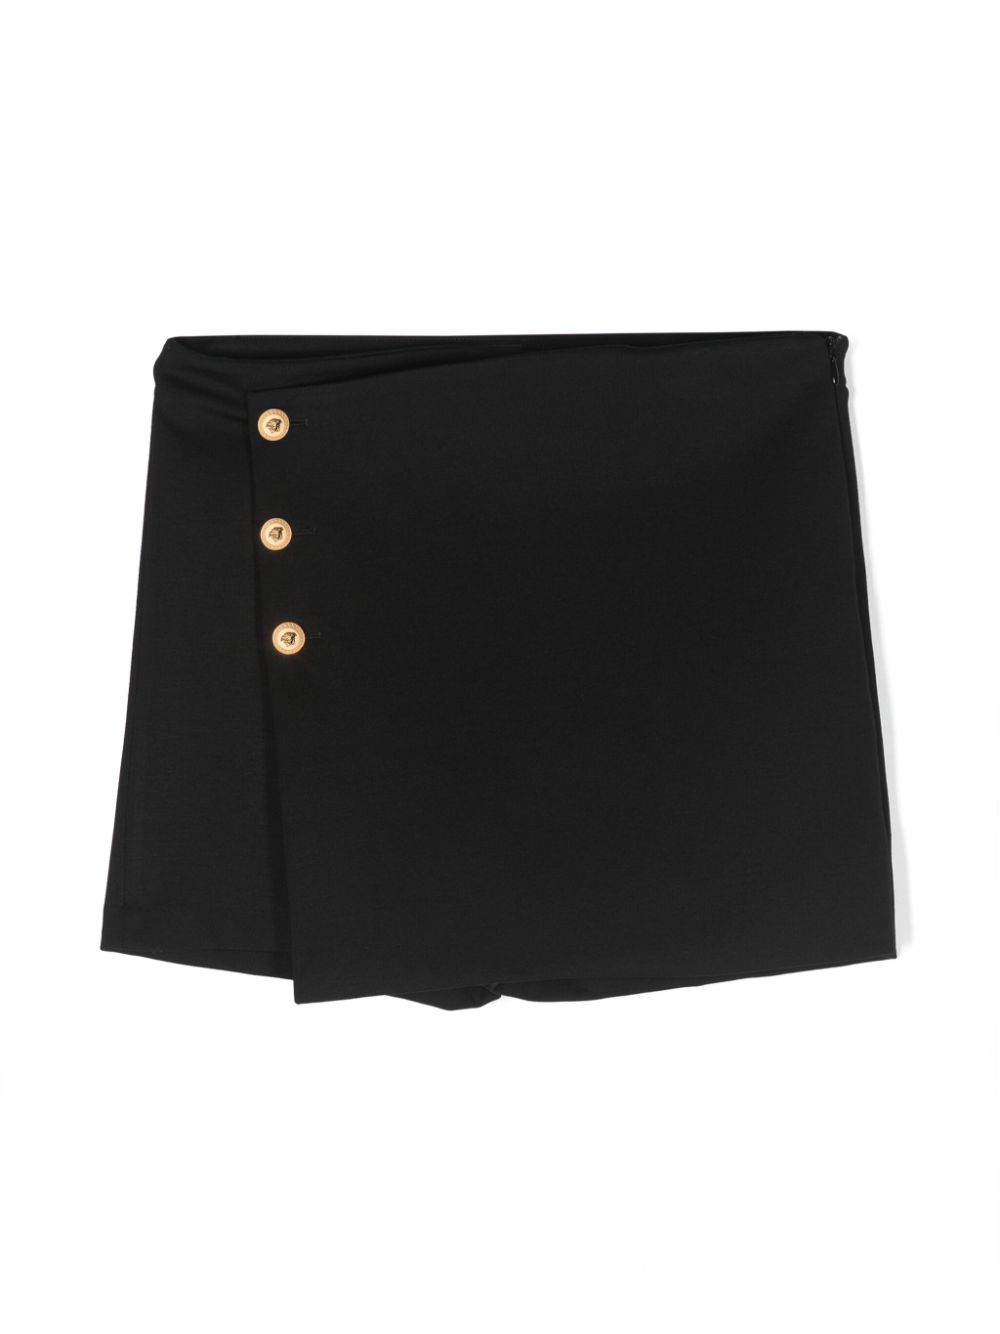 Black Bermuda shorts for girls with buttons